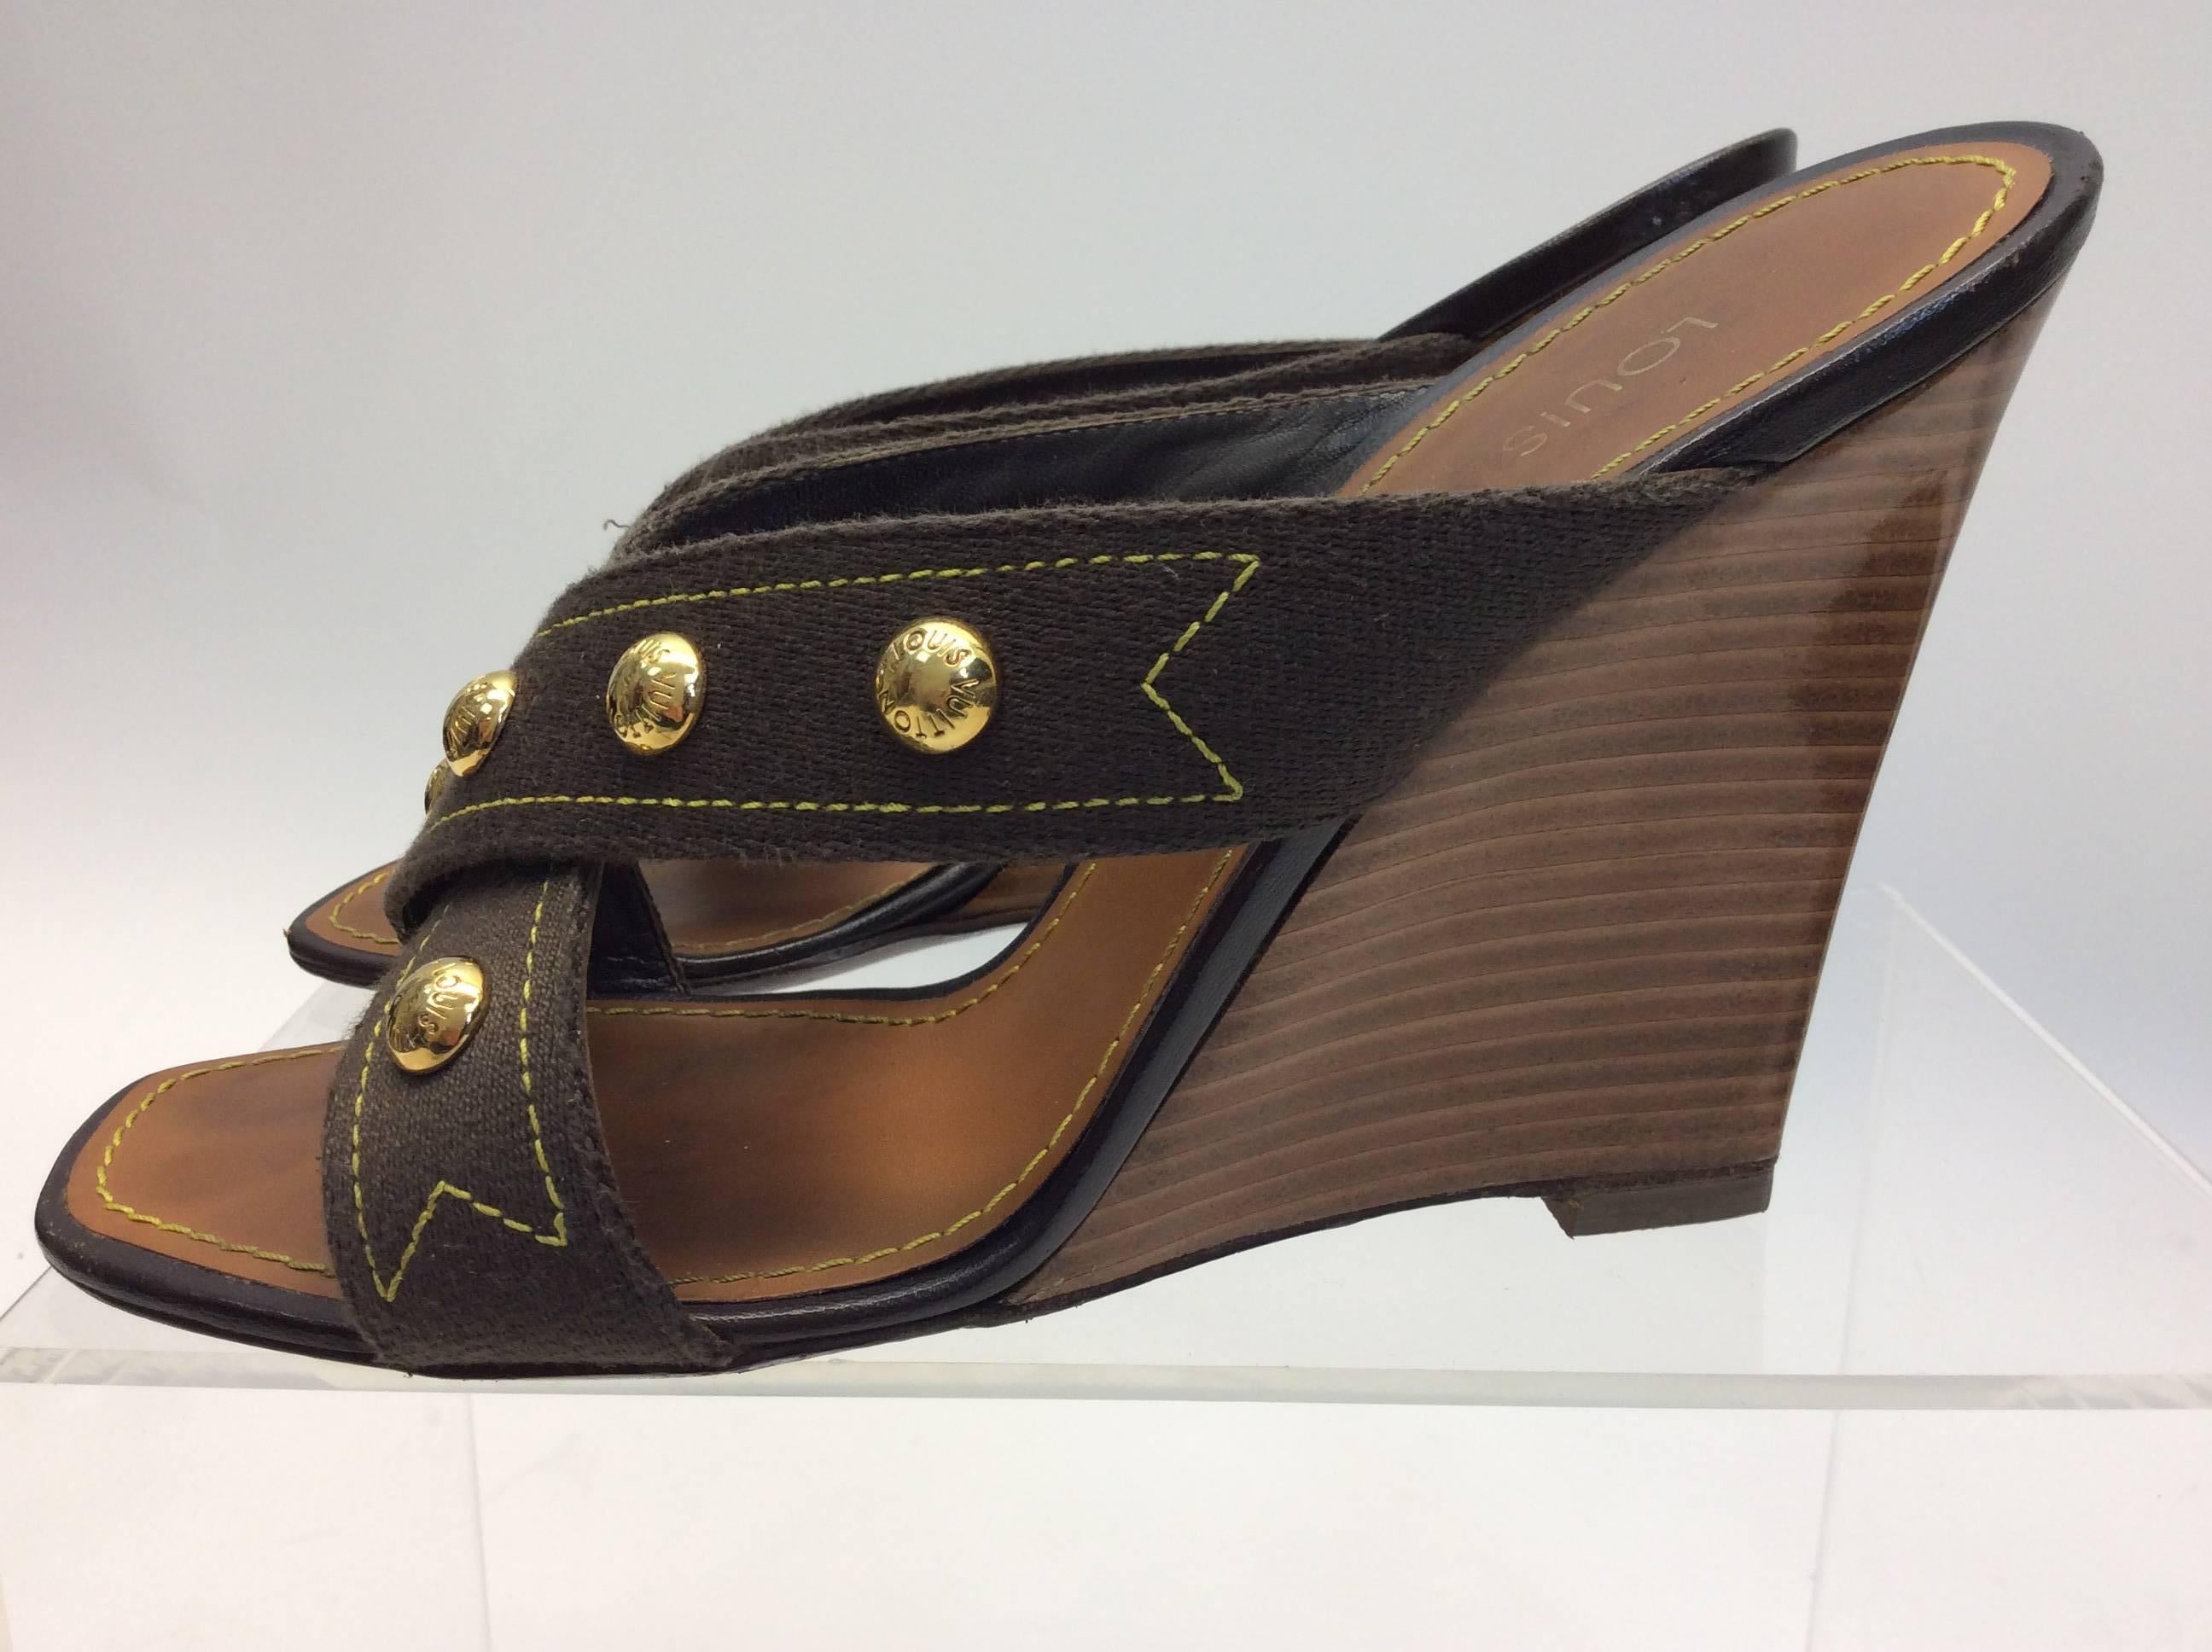 Louis Vuitton Brown Studded Leather Wedge
$250
Made in Italy
Size 39
4.5